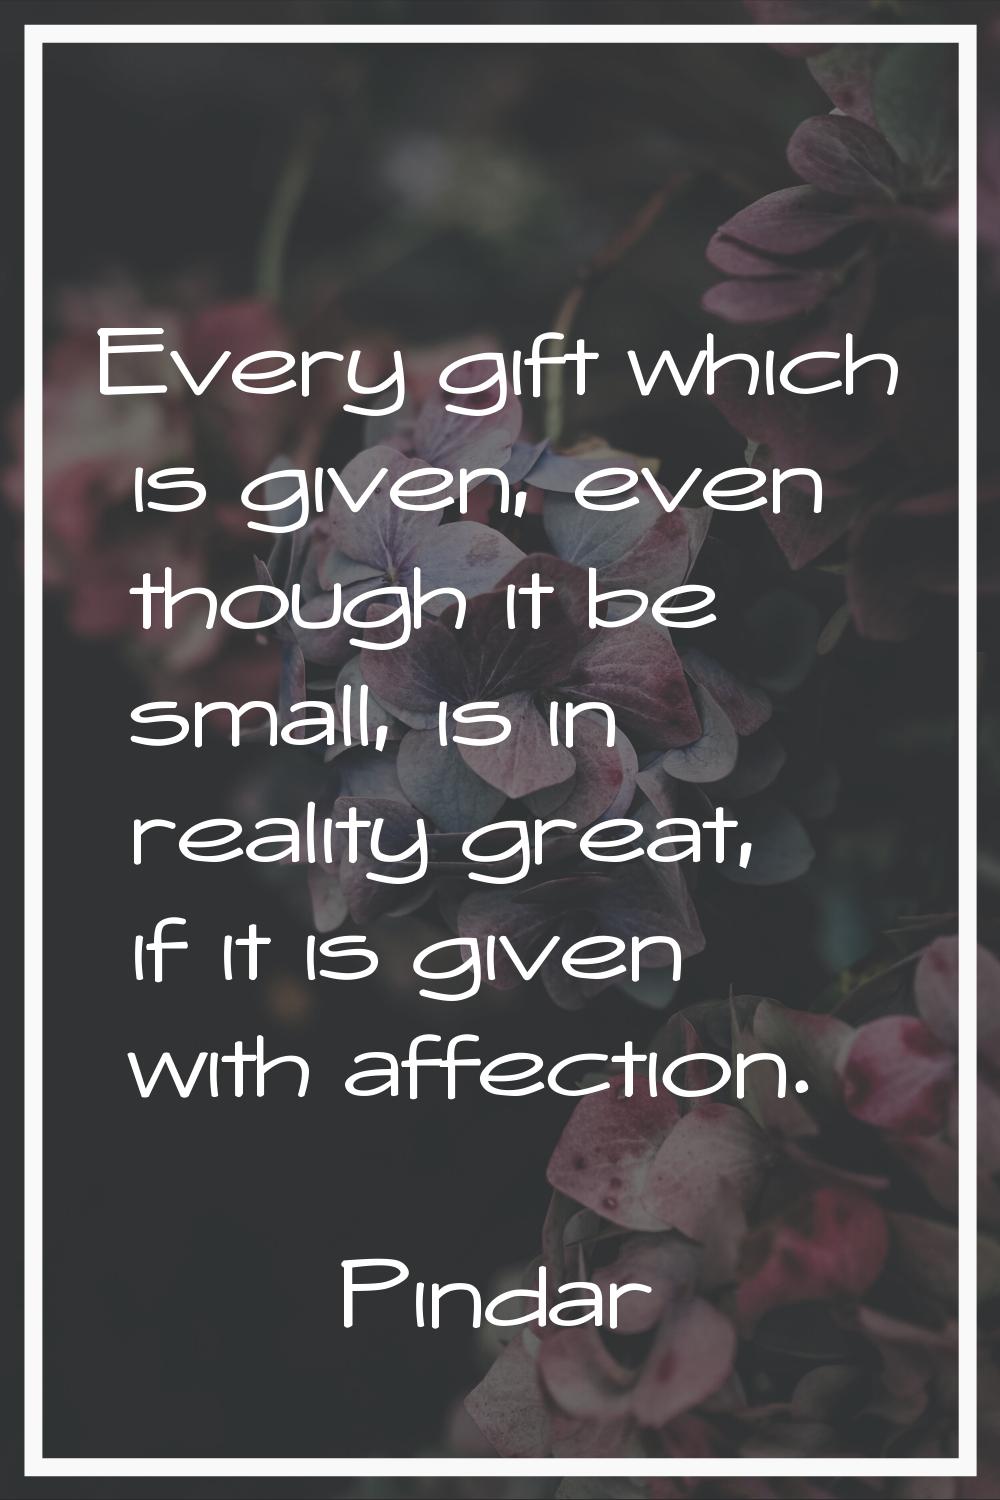 Every gift which is given, even though it be small, is in reality great, if it is given with affect